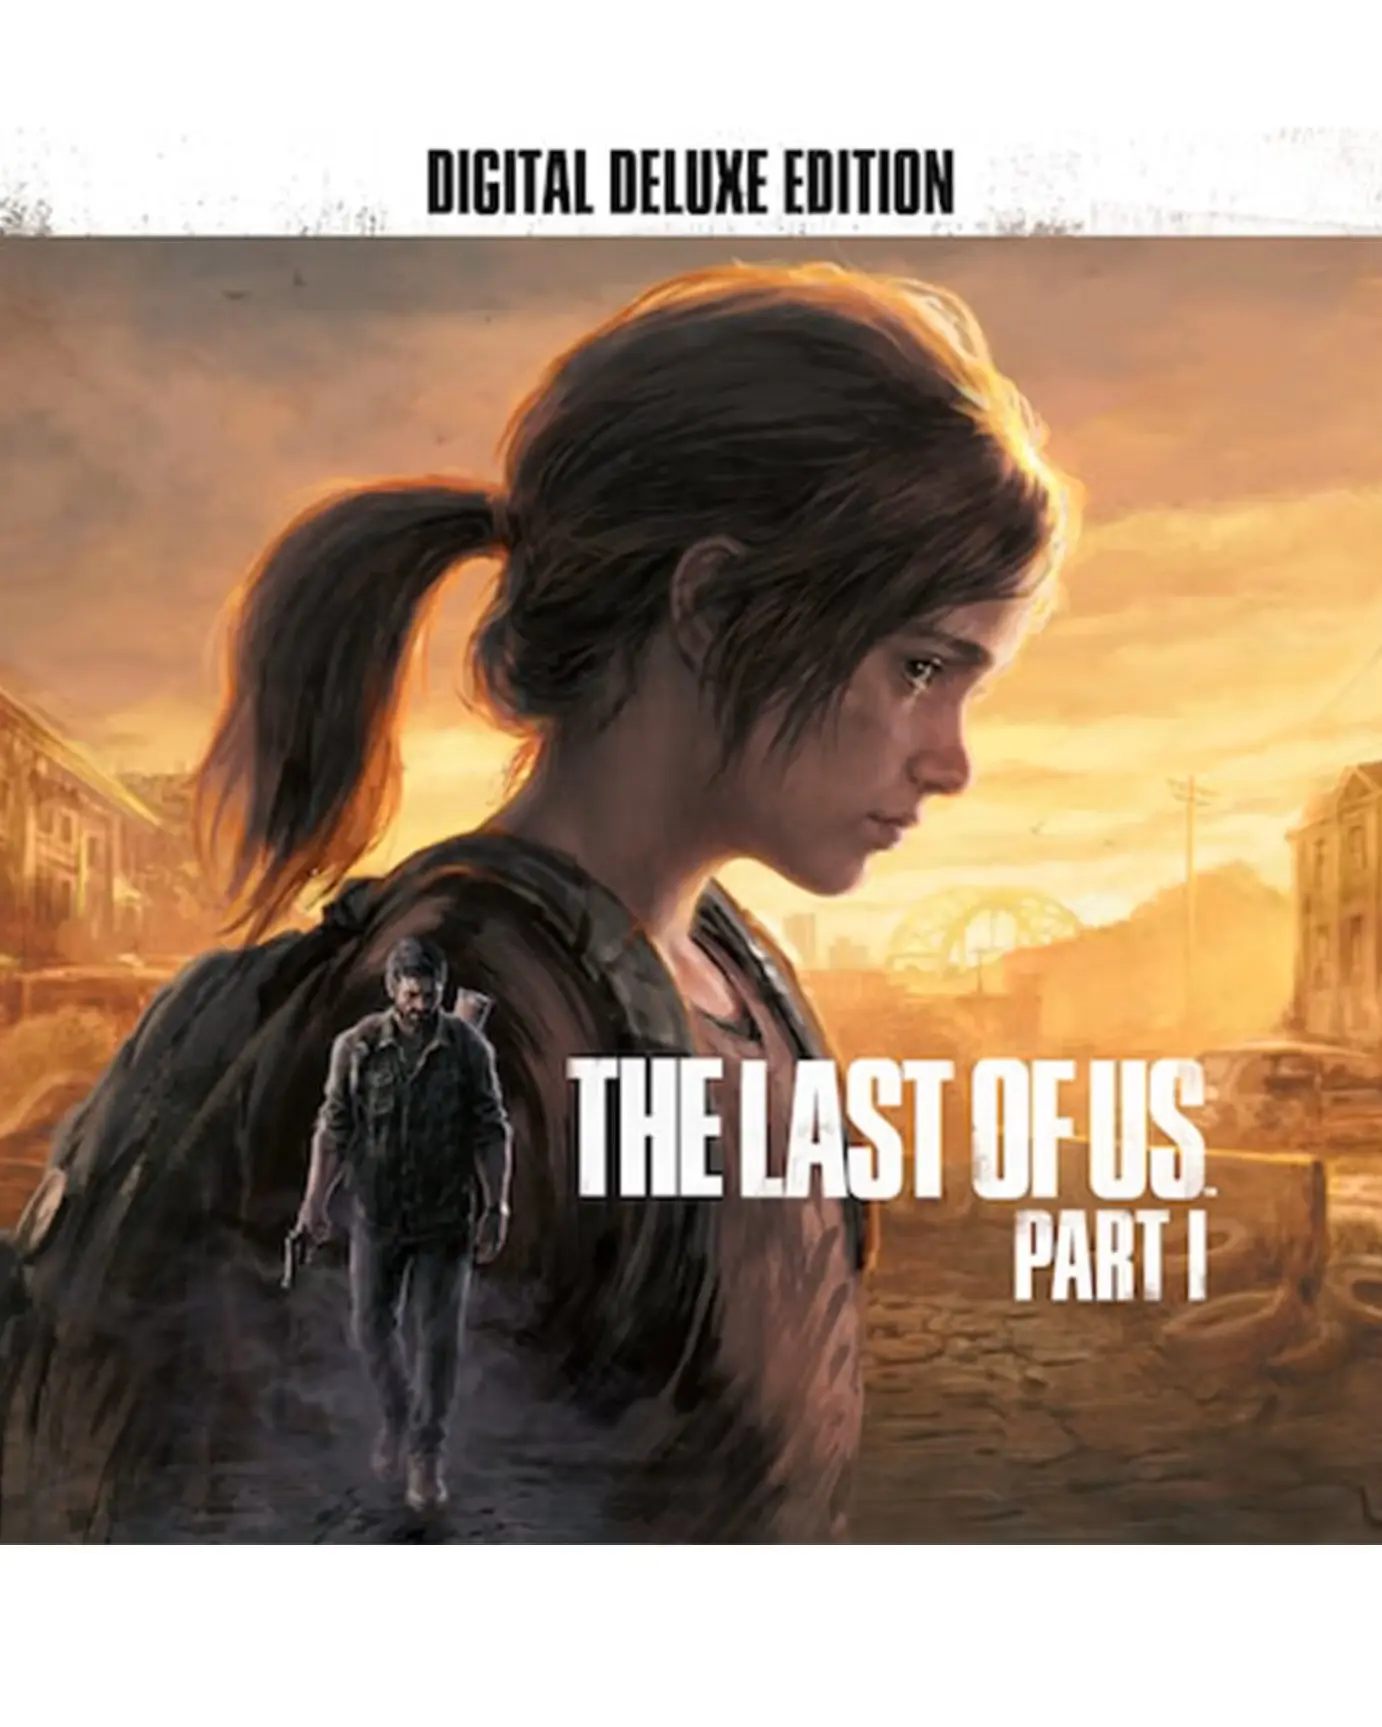 The Last of Us: Part I Digital Deluxe Edition (TR) (PC) - Steam - Digital Code